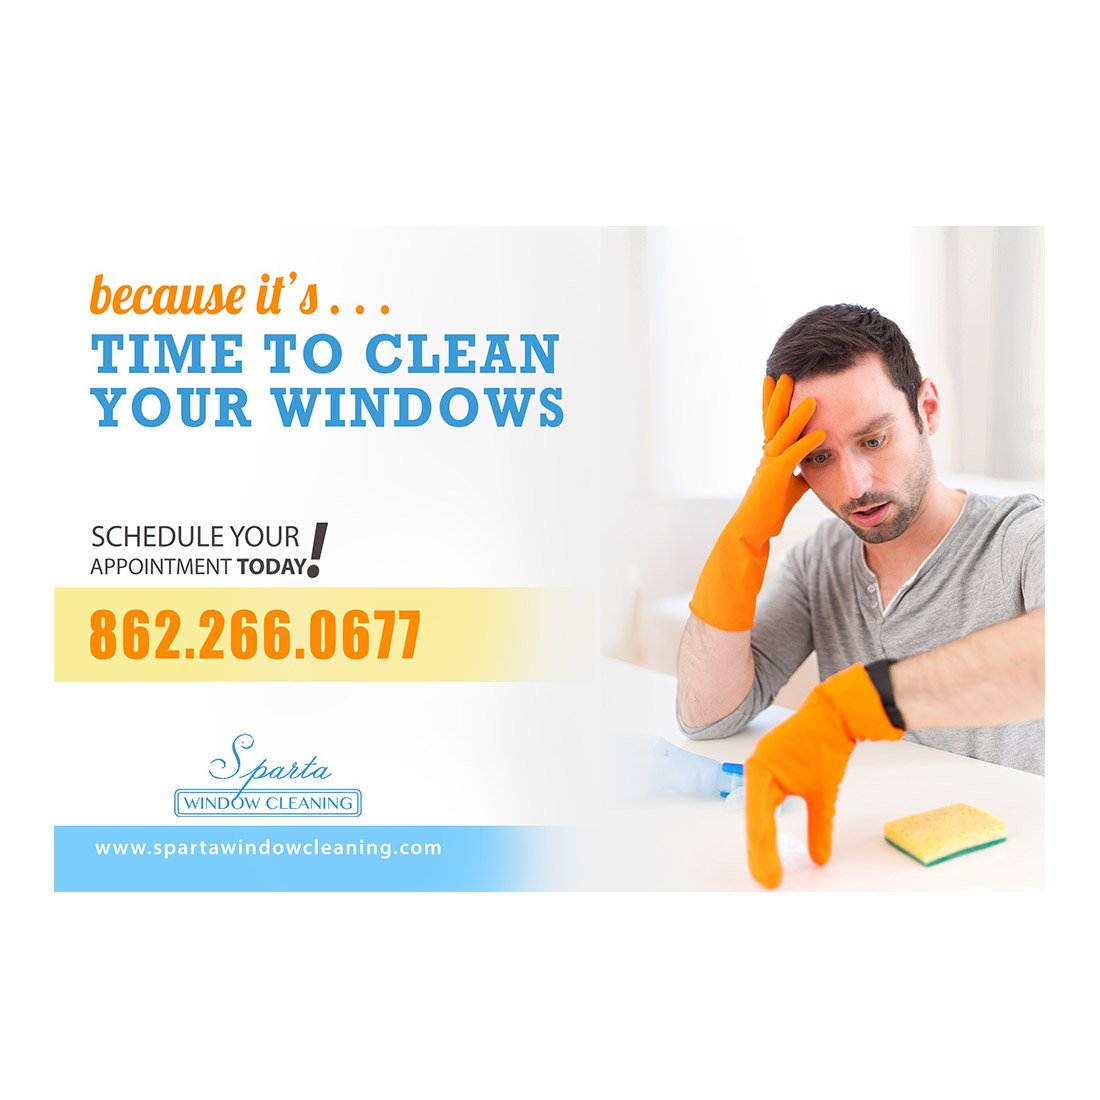 It's Time To Clean Your Windows Design Suite - Small Postcard - Front View